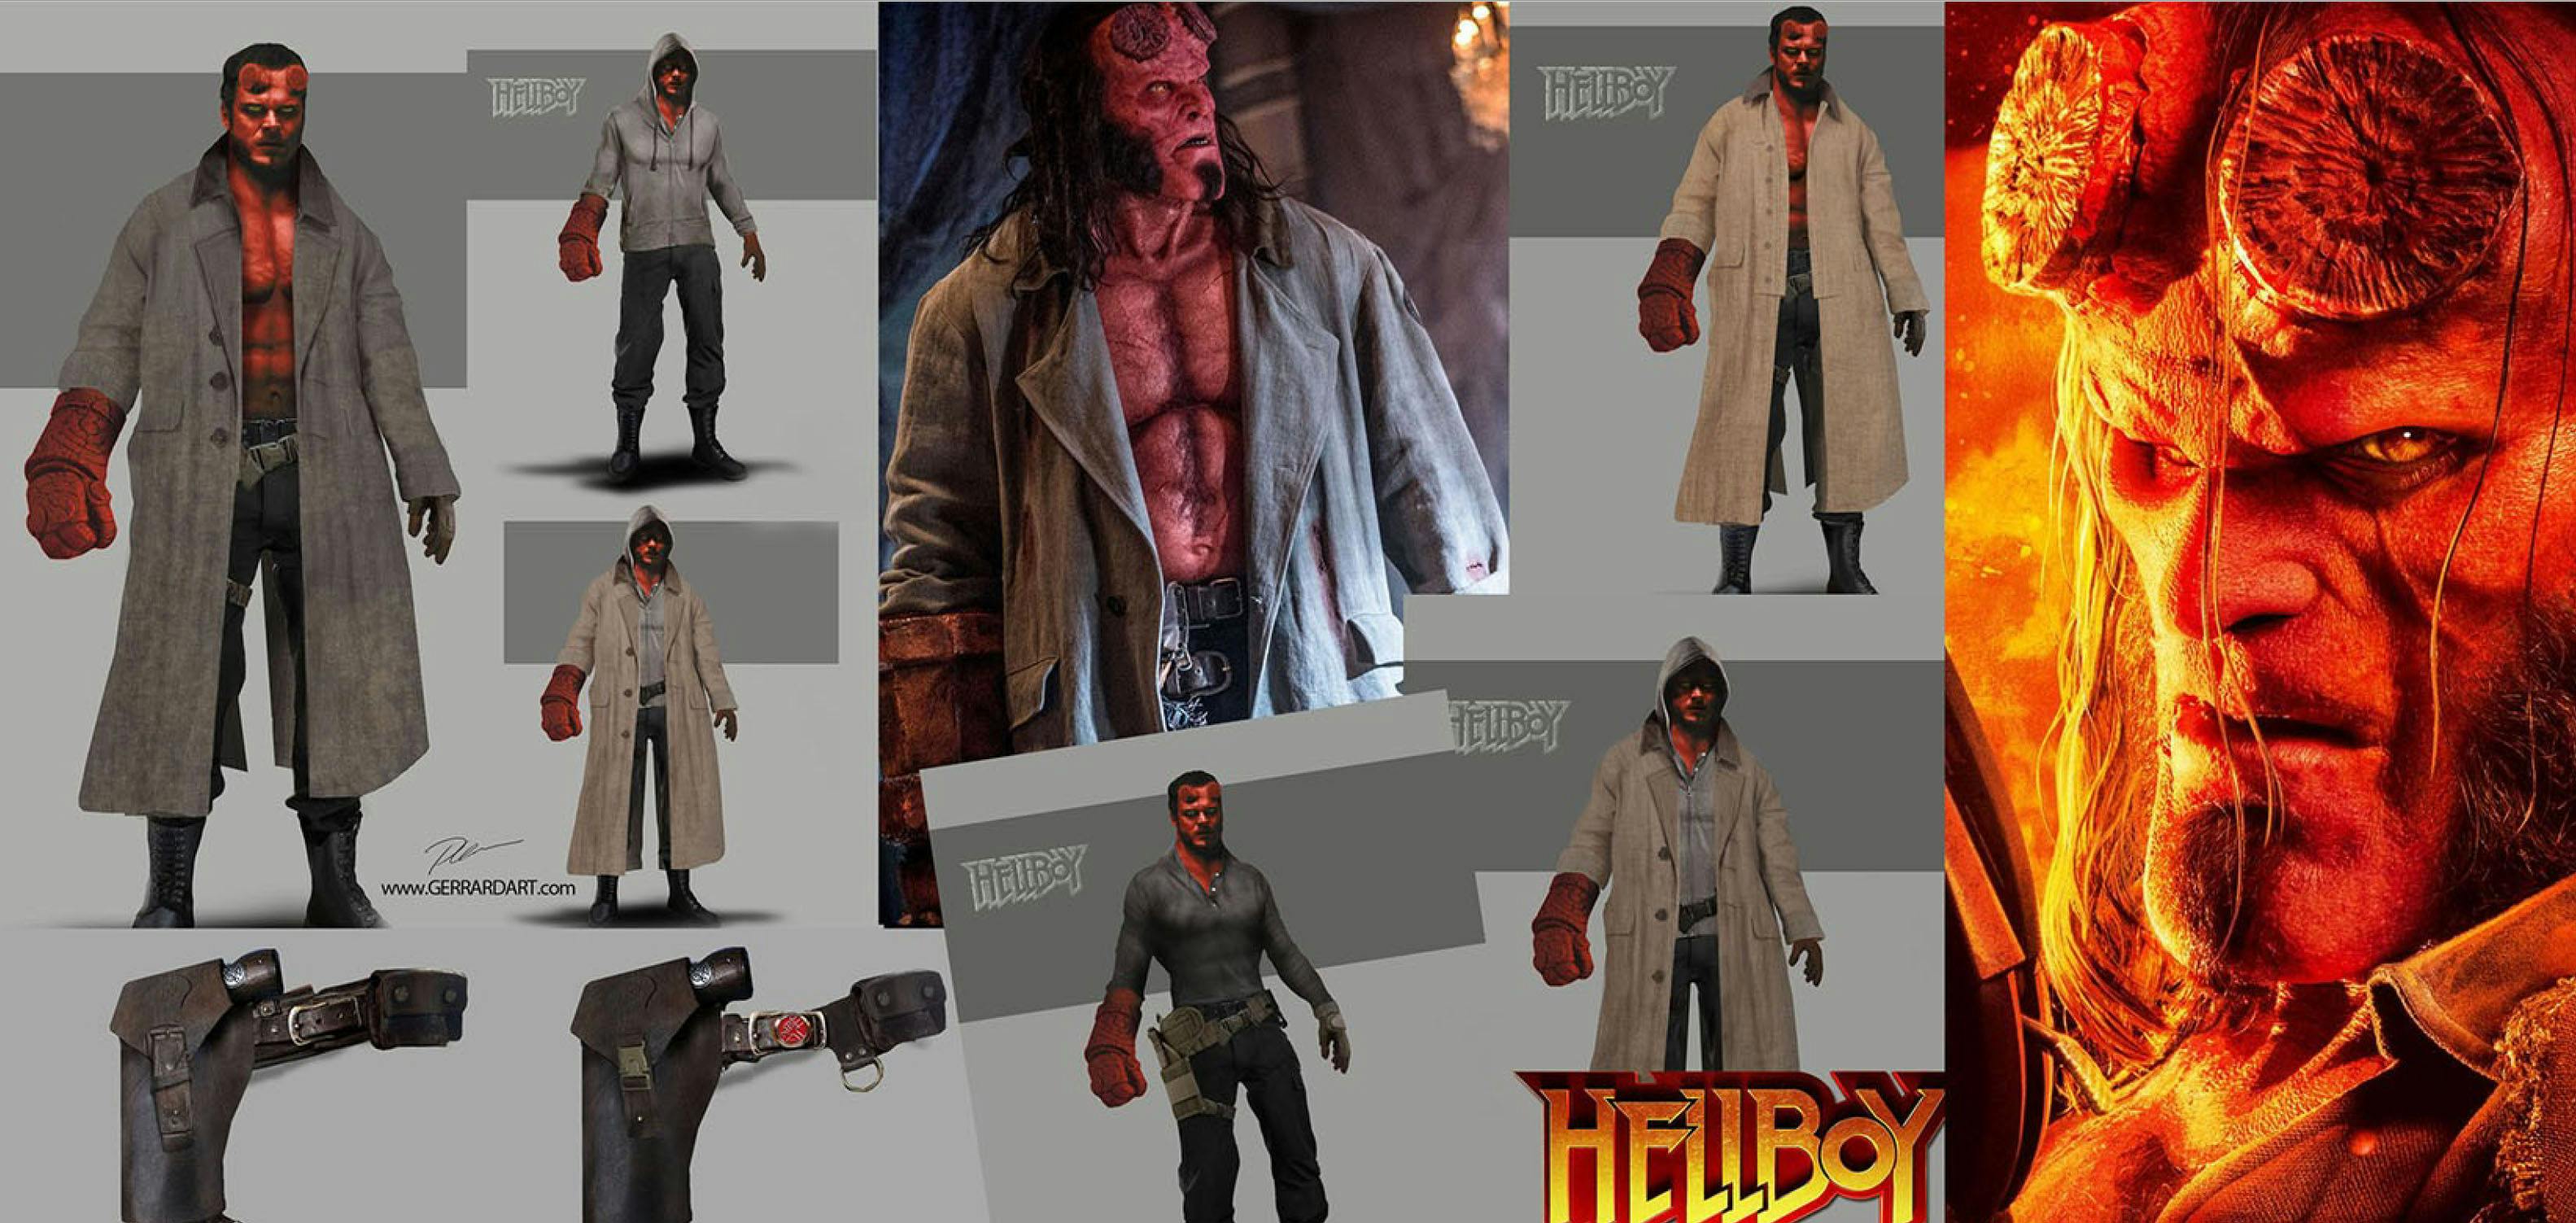 Concept art for Hellboy